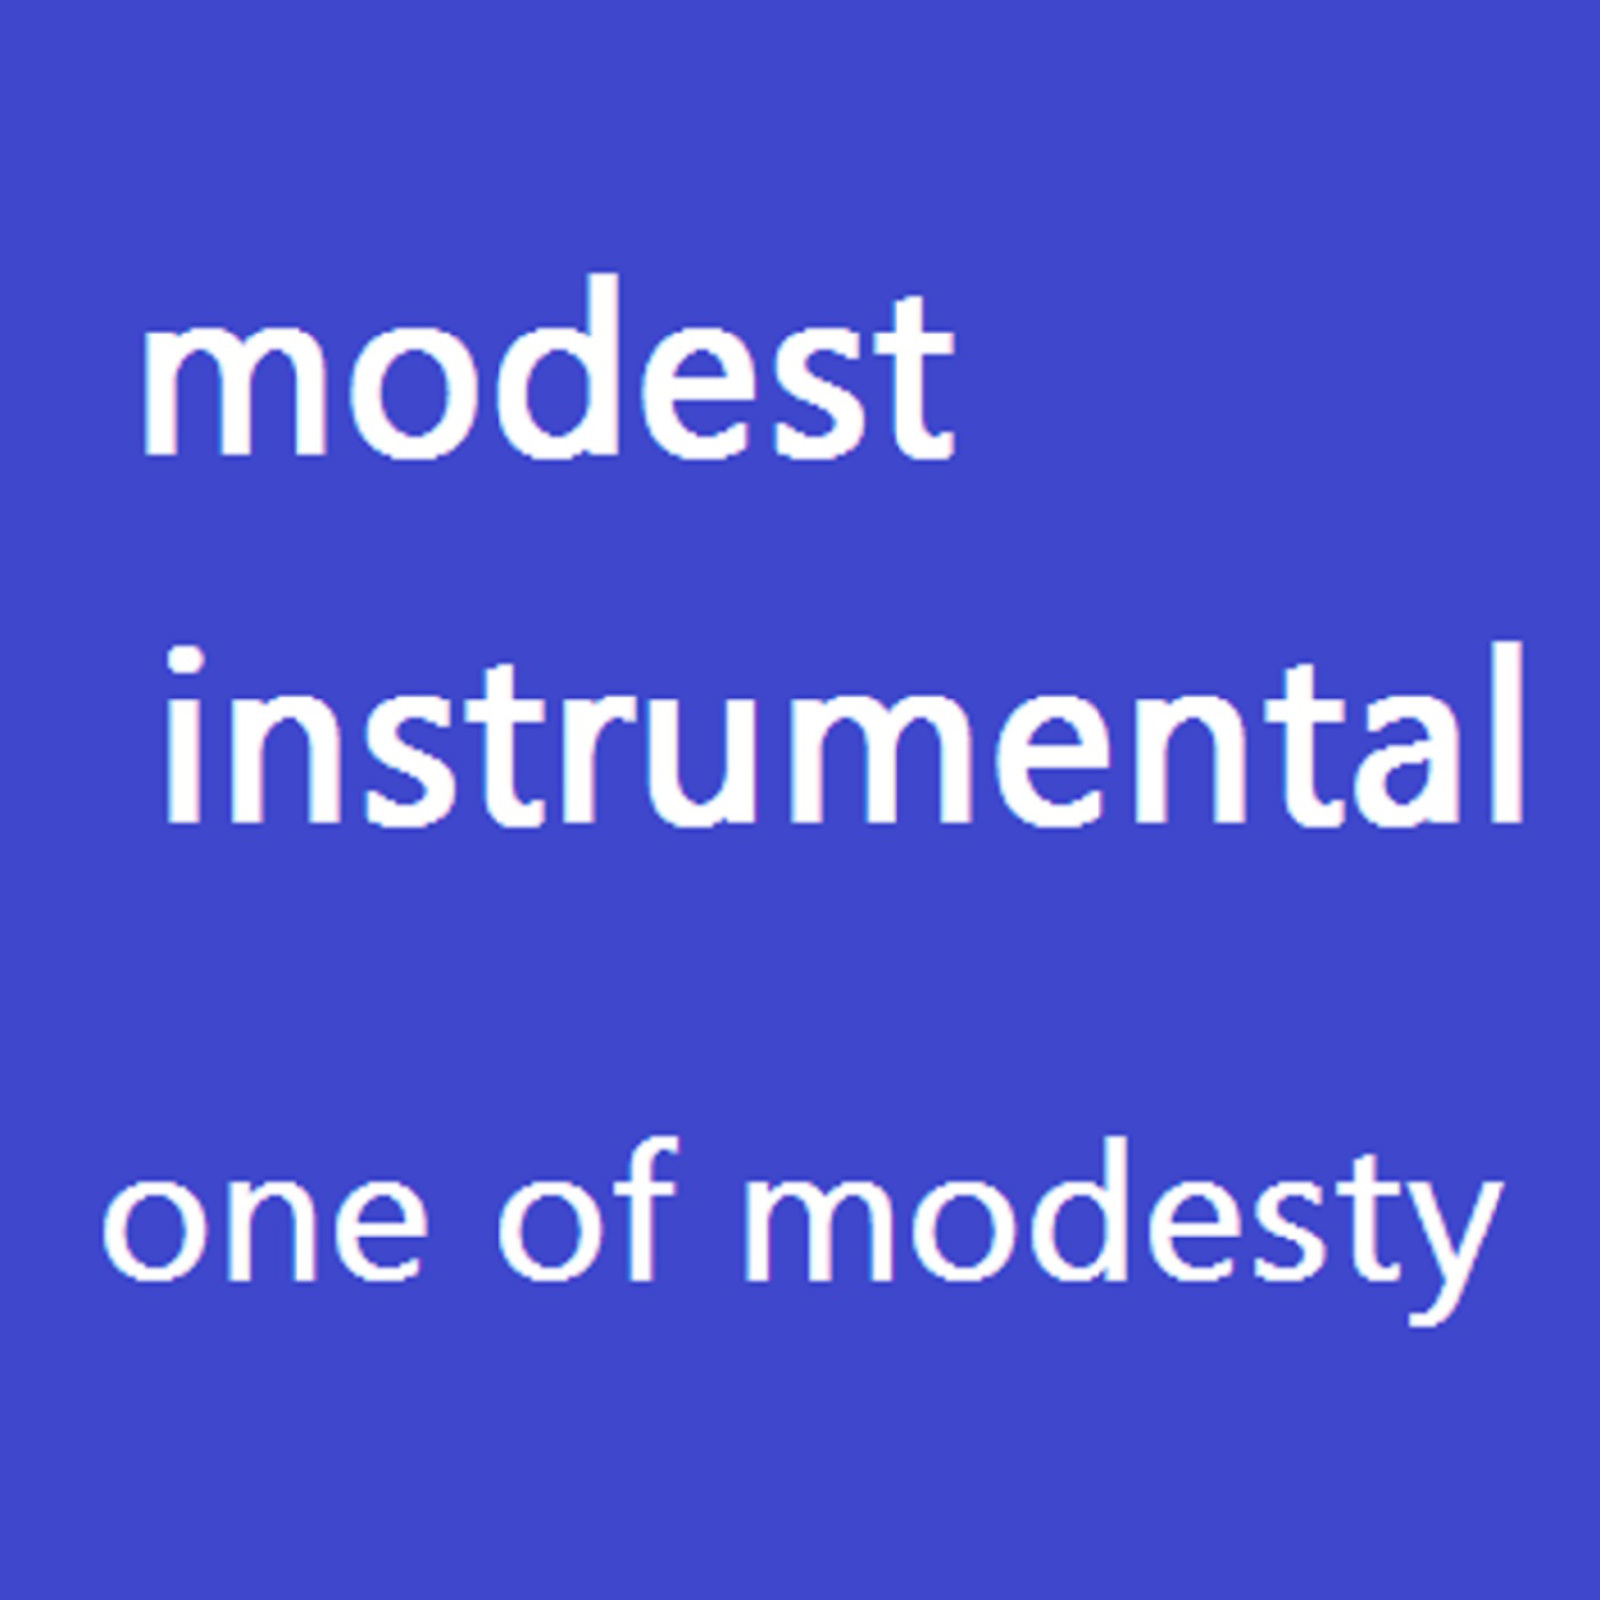 the present condition / one of modesty